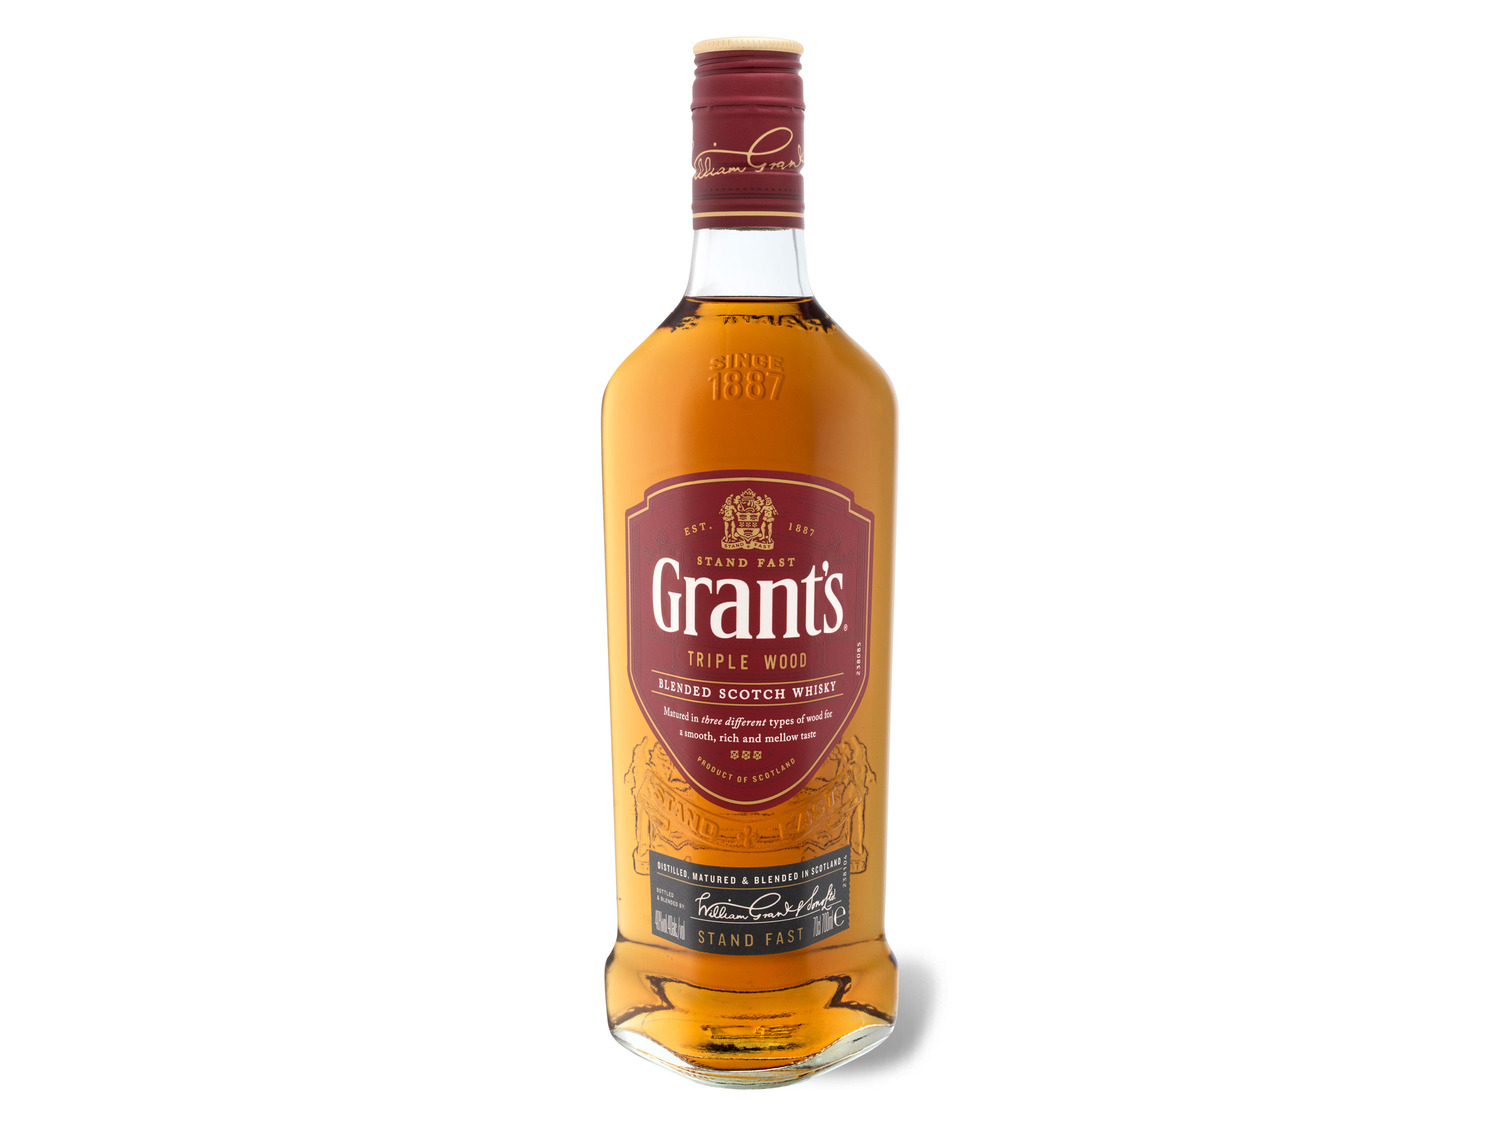 Grant's Triple Wood Blended Scotch Whisky 40% Vol